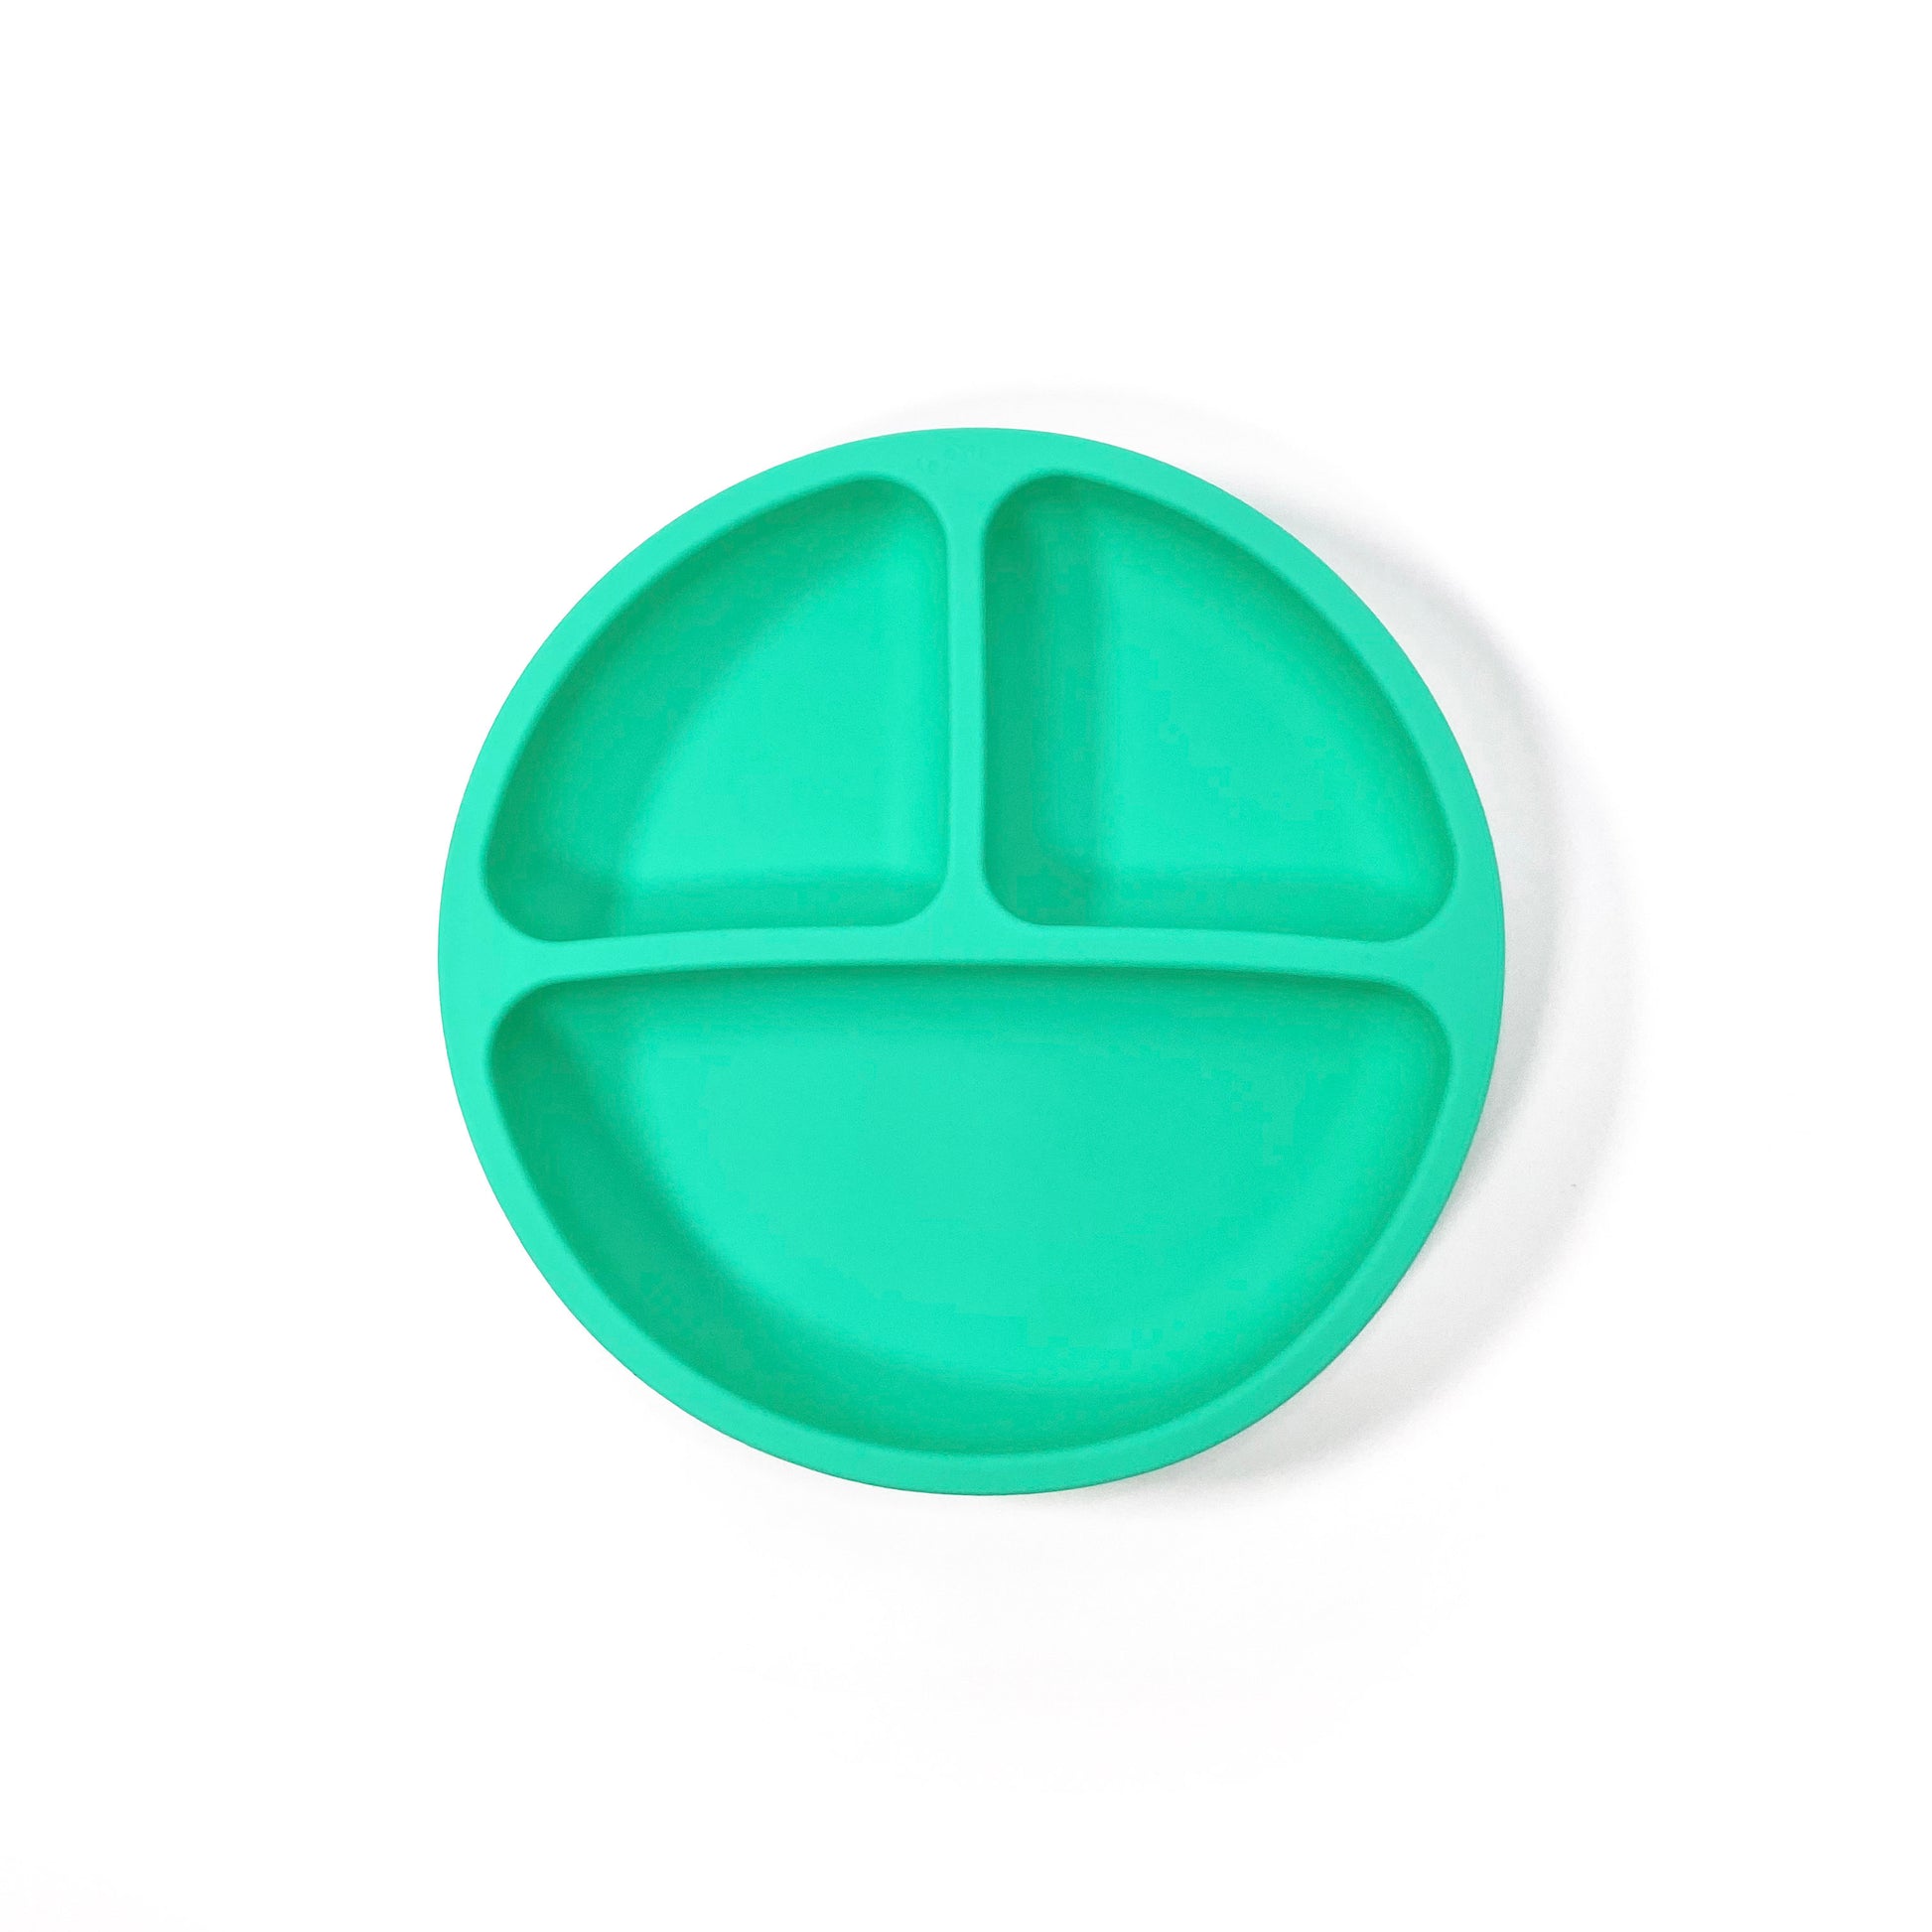 A seafoam green silicone children’s section plate with suction cups on the base. View from above.